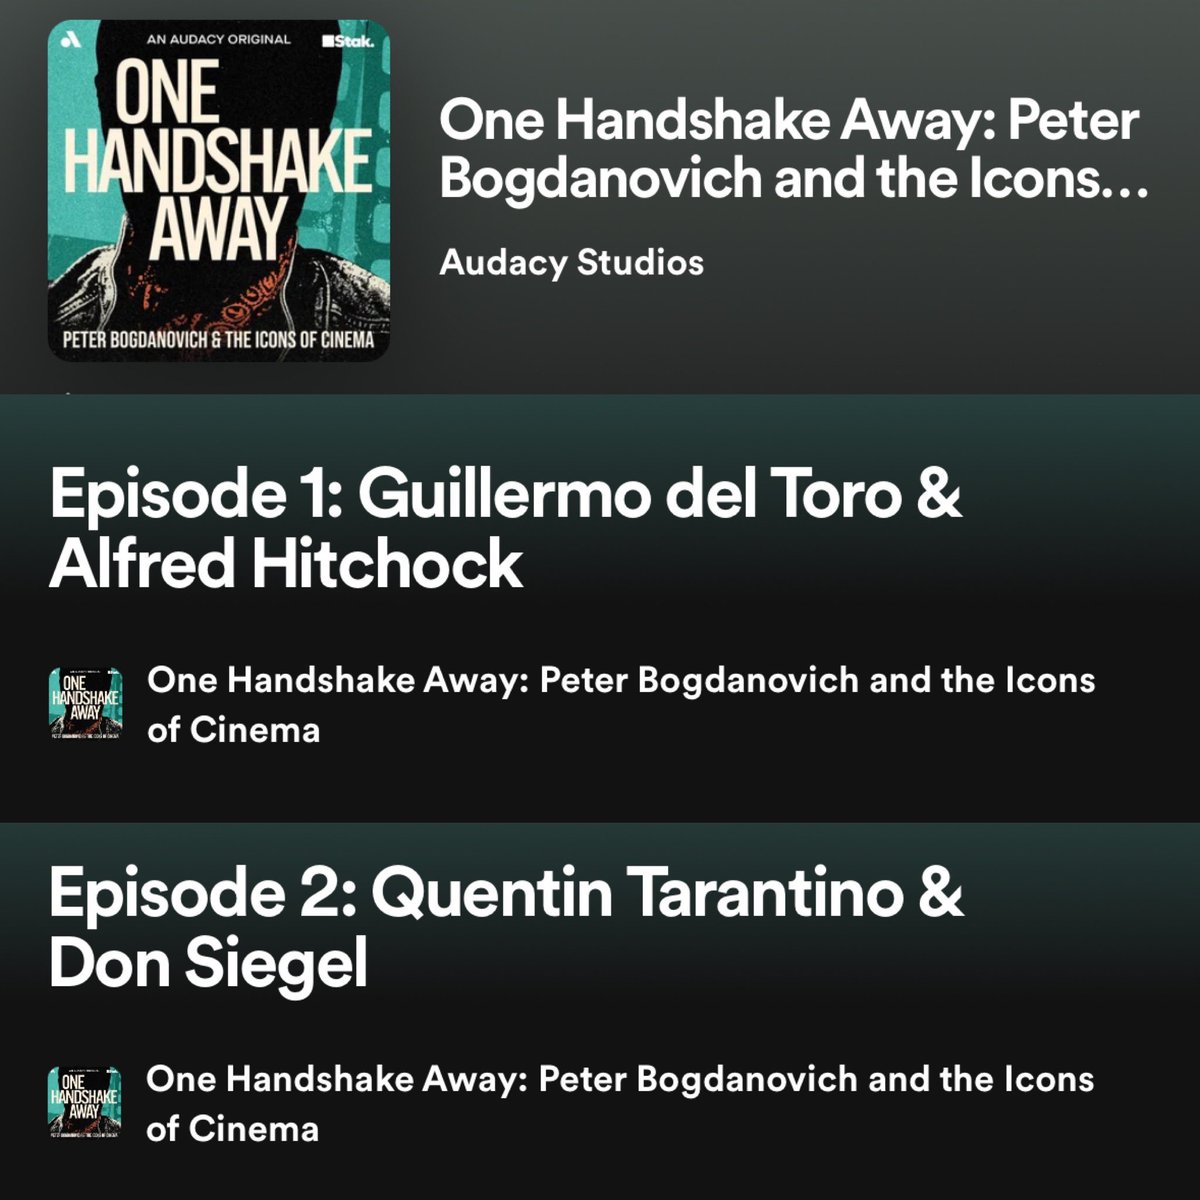 First two episodes of Peter Bogdanovich’s  ONE HANDSHAKE AWAY with @RealGDT and Quentin Tarantino are available now . Here is the link open.spotify.com/show/1bt59Fzqq… 
#PeterBogdanovich #OneHandshakeAway #GuillermodelToro #QuentinTarantino